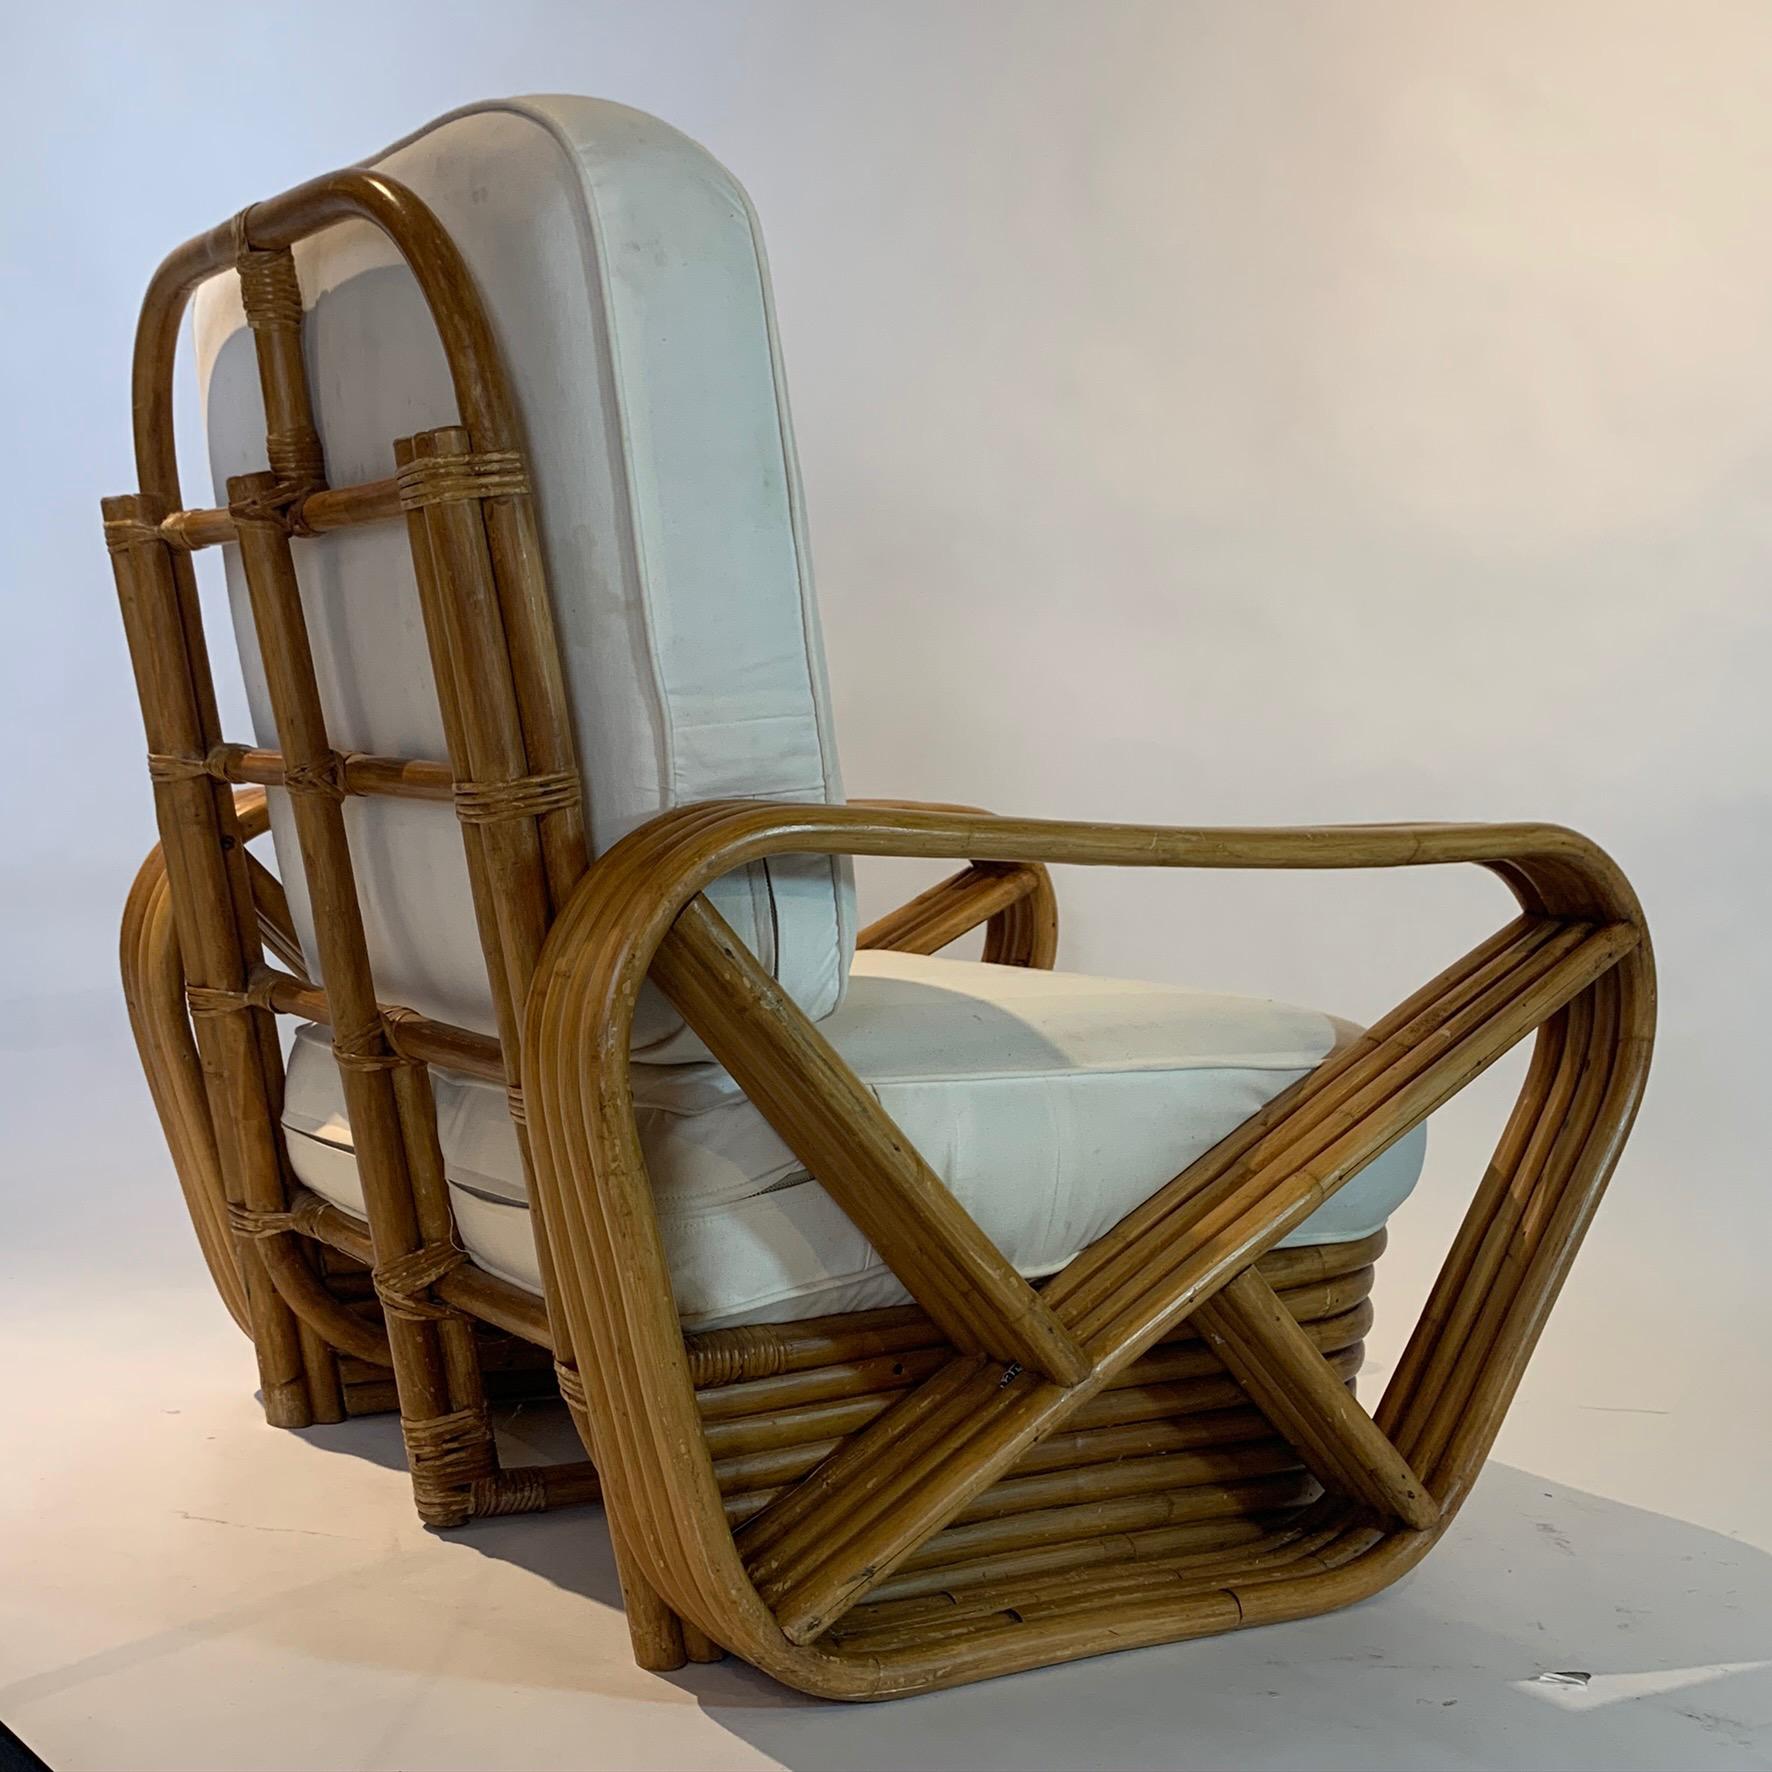 20th Century Pair of Rattan 1940s Paul Frankl Style Pretzel Chairs with Ottoman from Japan